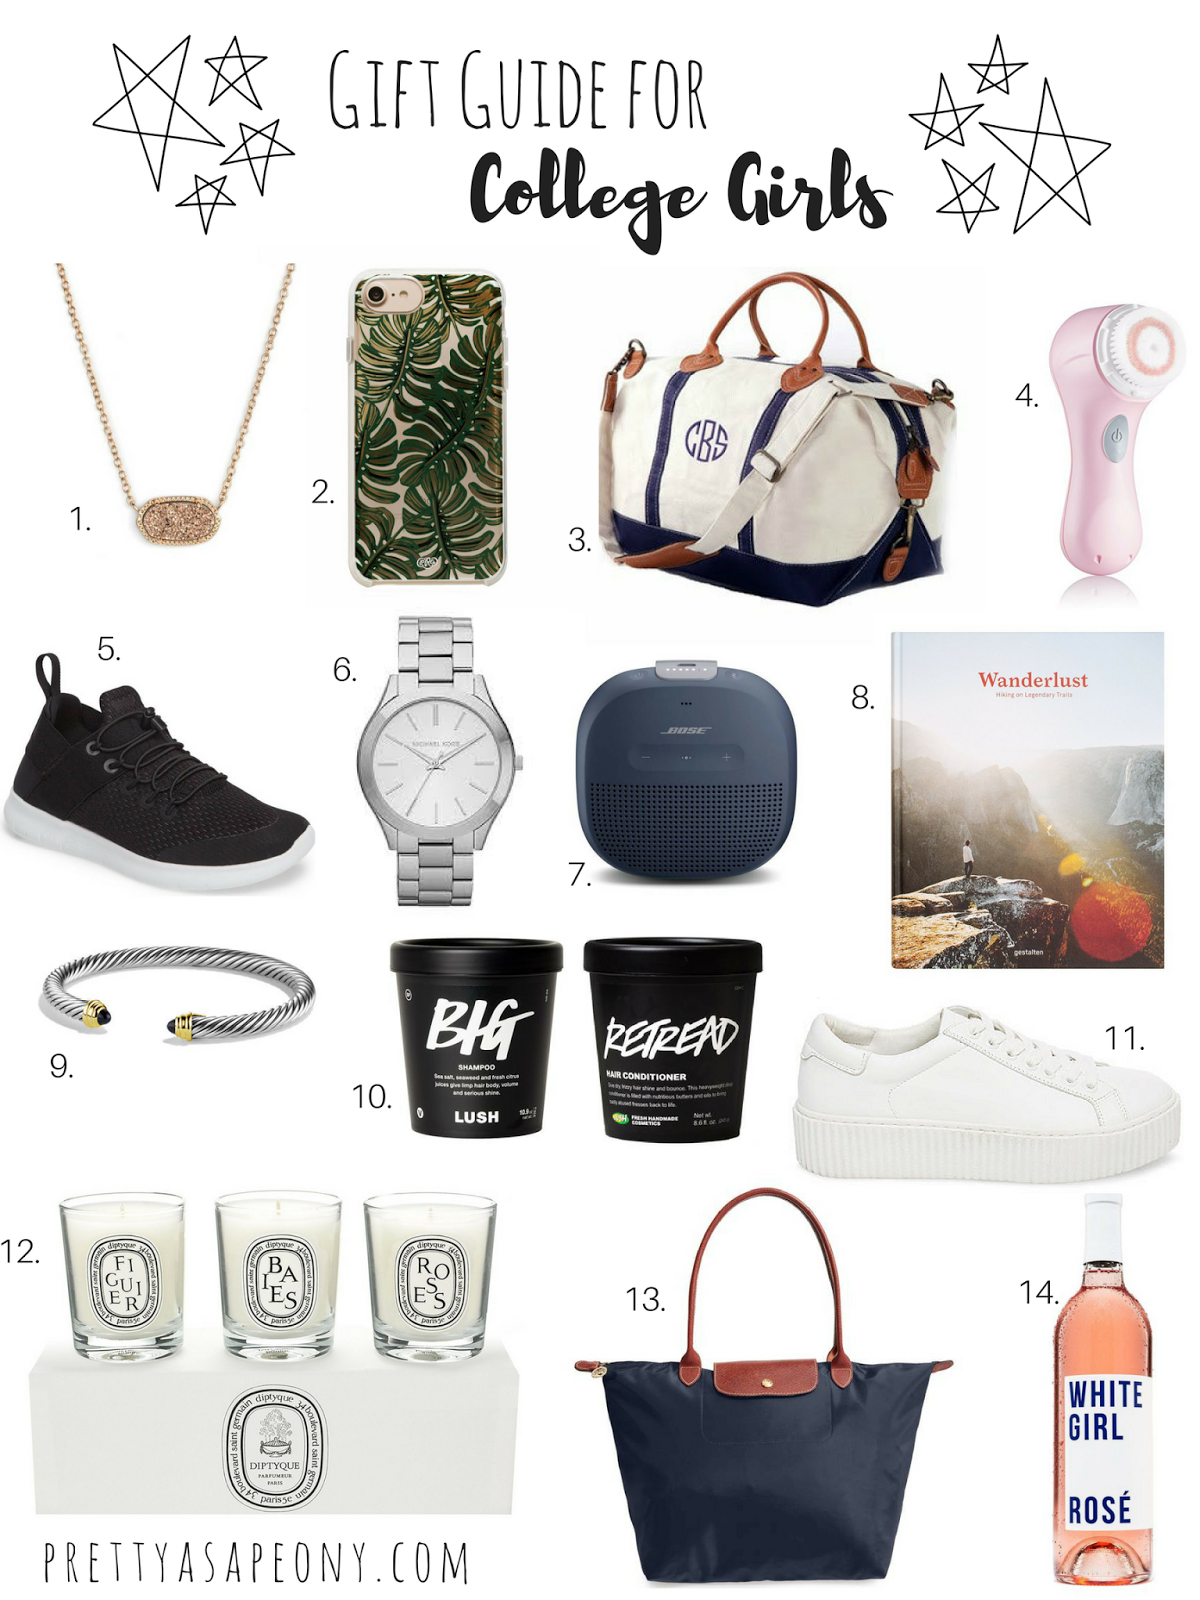 Pretty as a Peony Holiday Gift Guide College Girls